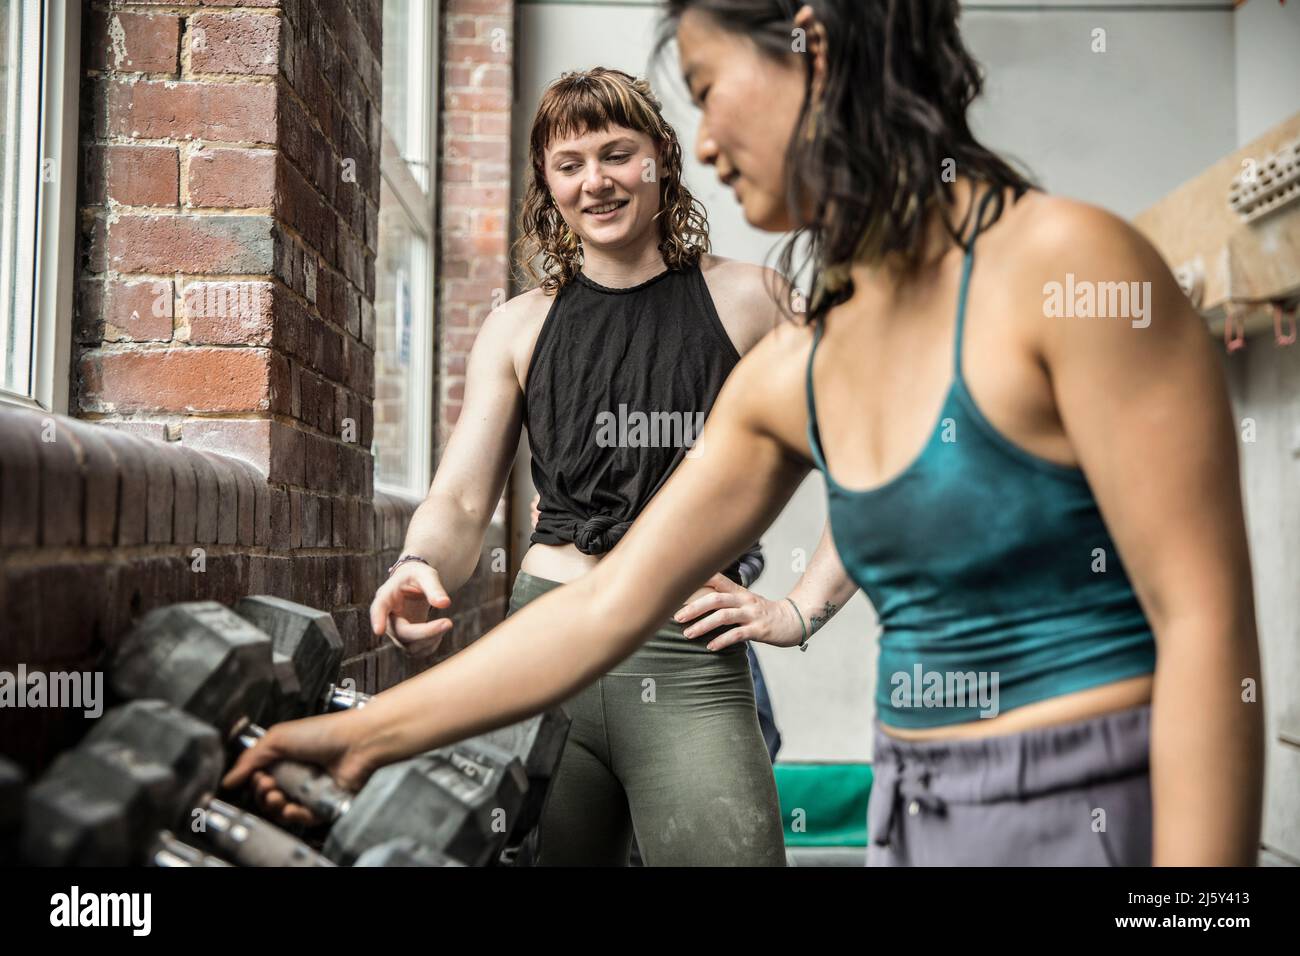 Women friends working out with dumbbells in gym Stock Photo